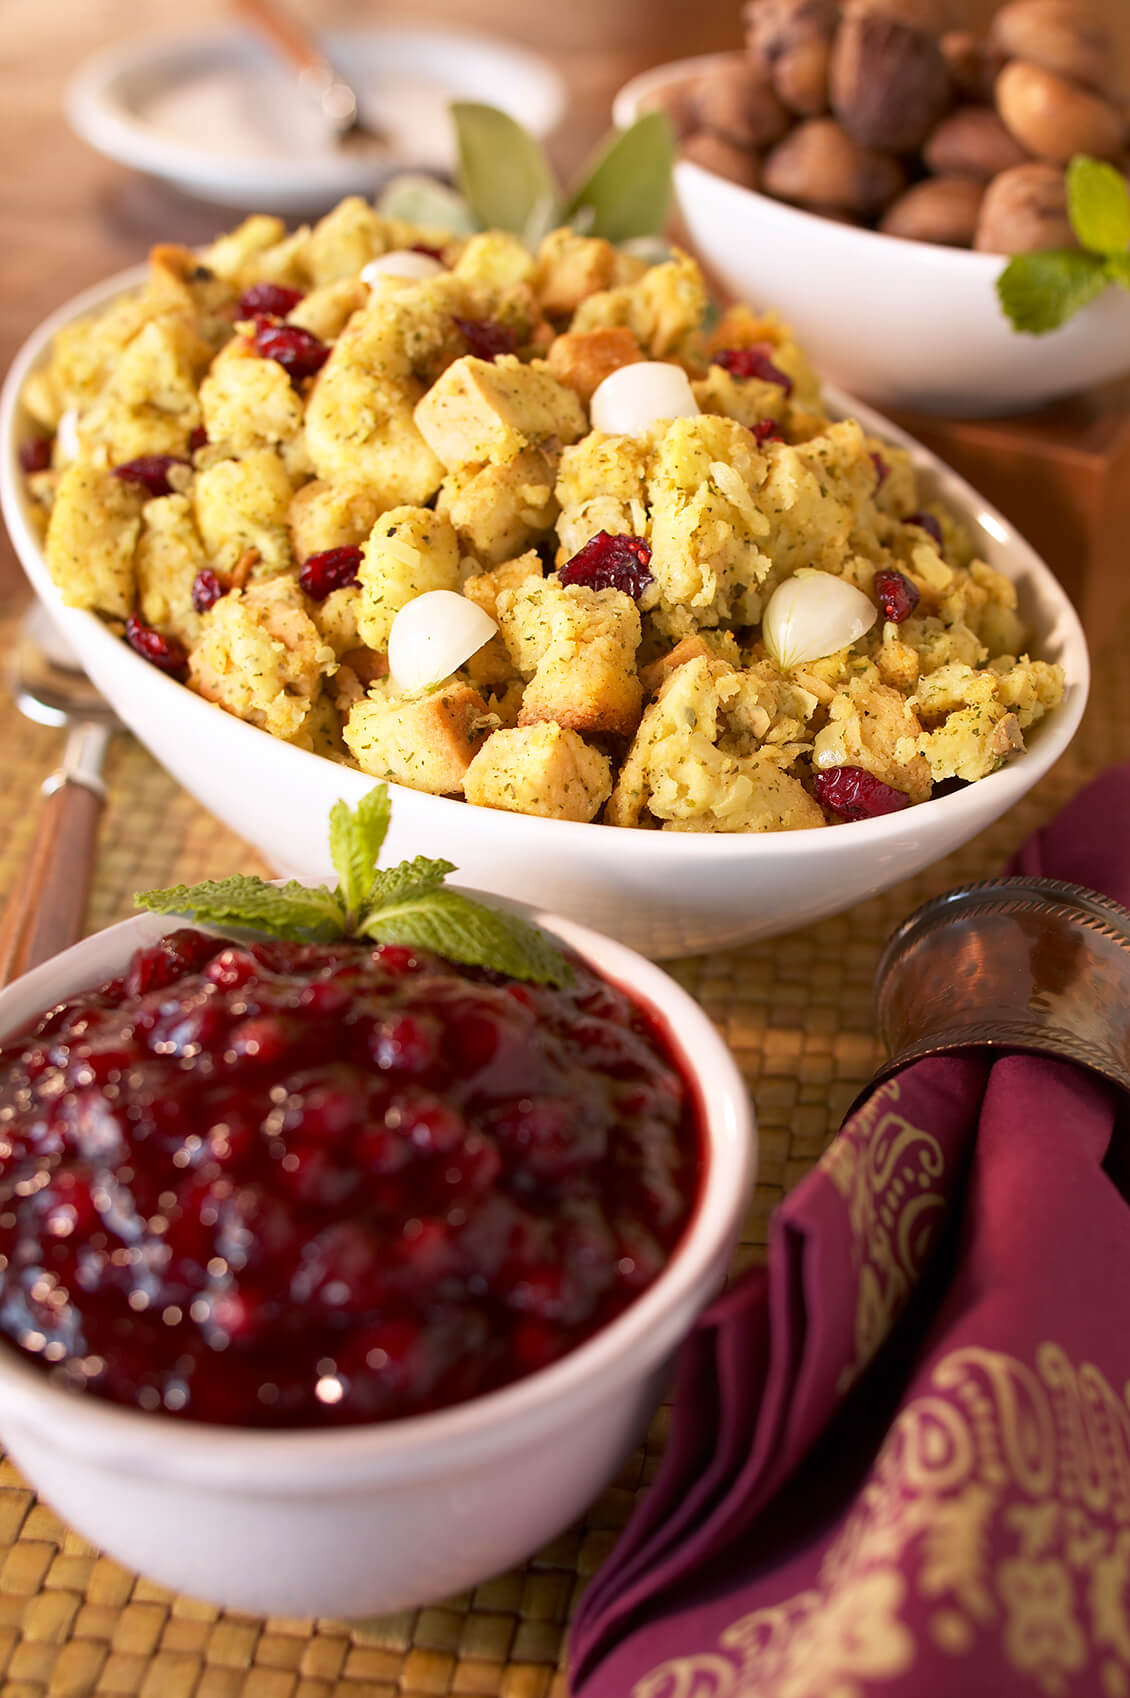 Thanksgiving cranberries and stuffing professional food photography